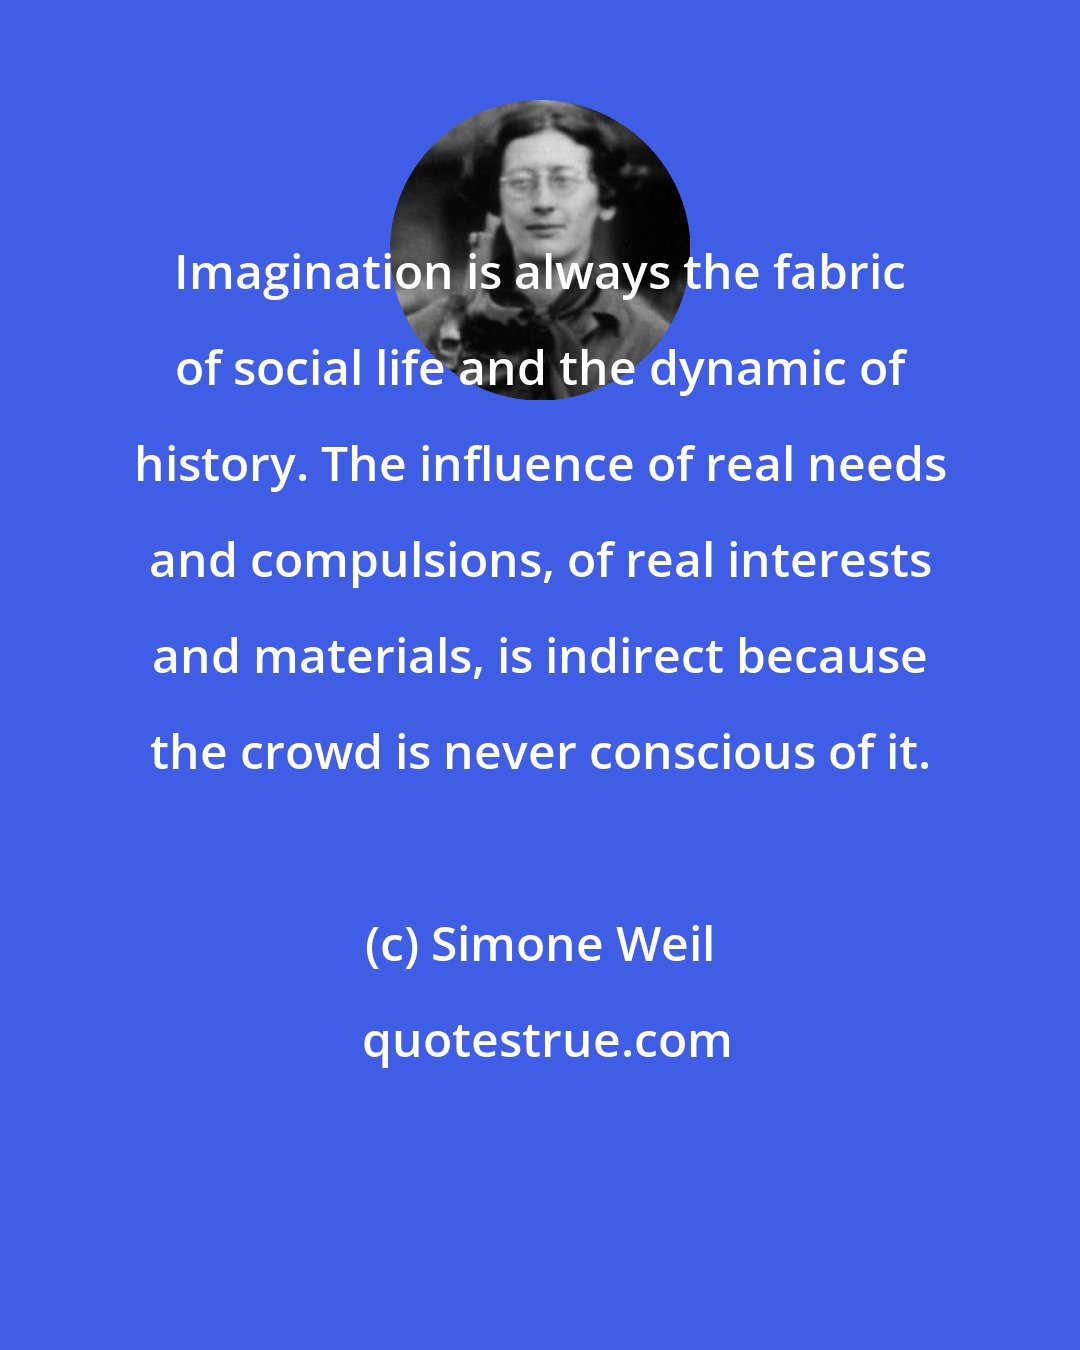 Simone Weil: Imagination is always the fabric of social life and the dynamic of history. The influence of real needs and compulsions, of real interests and materials, is indirect because the crowd is never conscious of it.